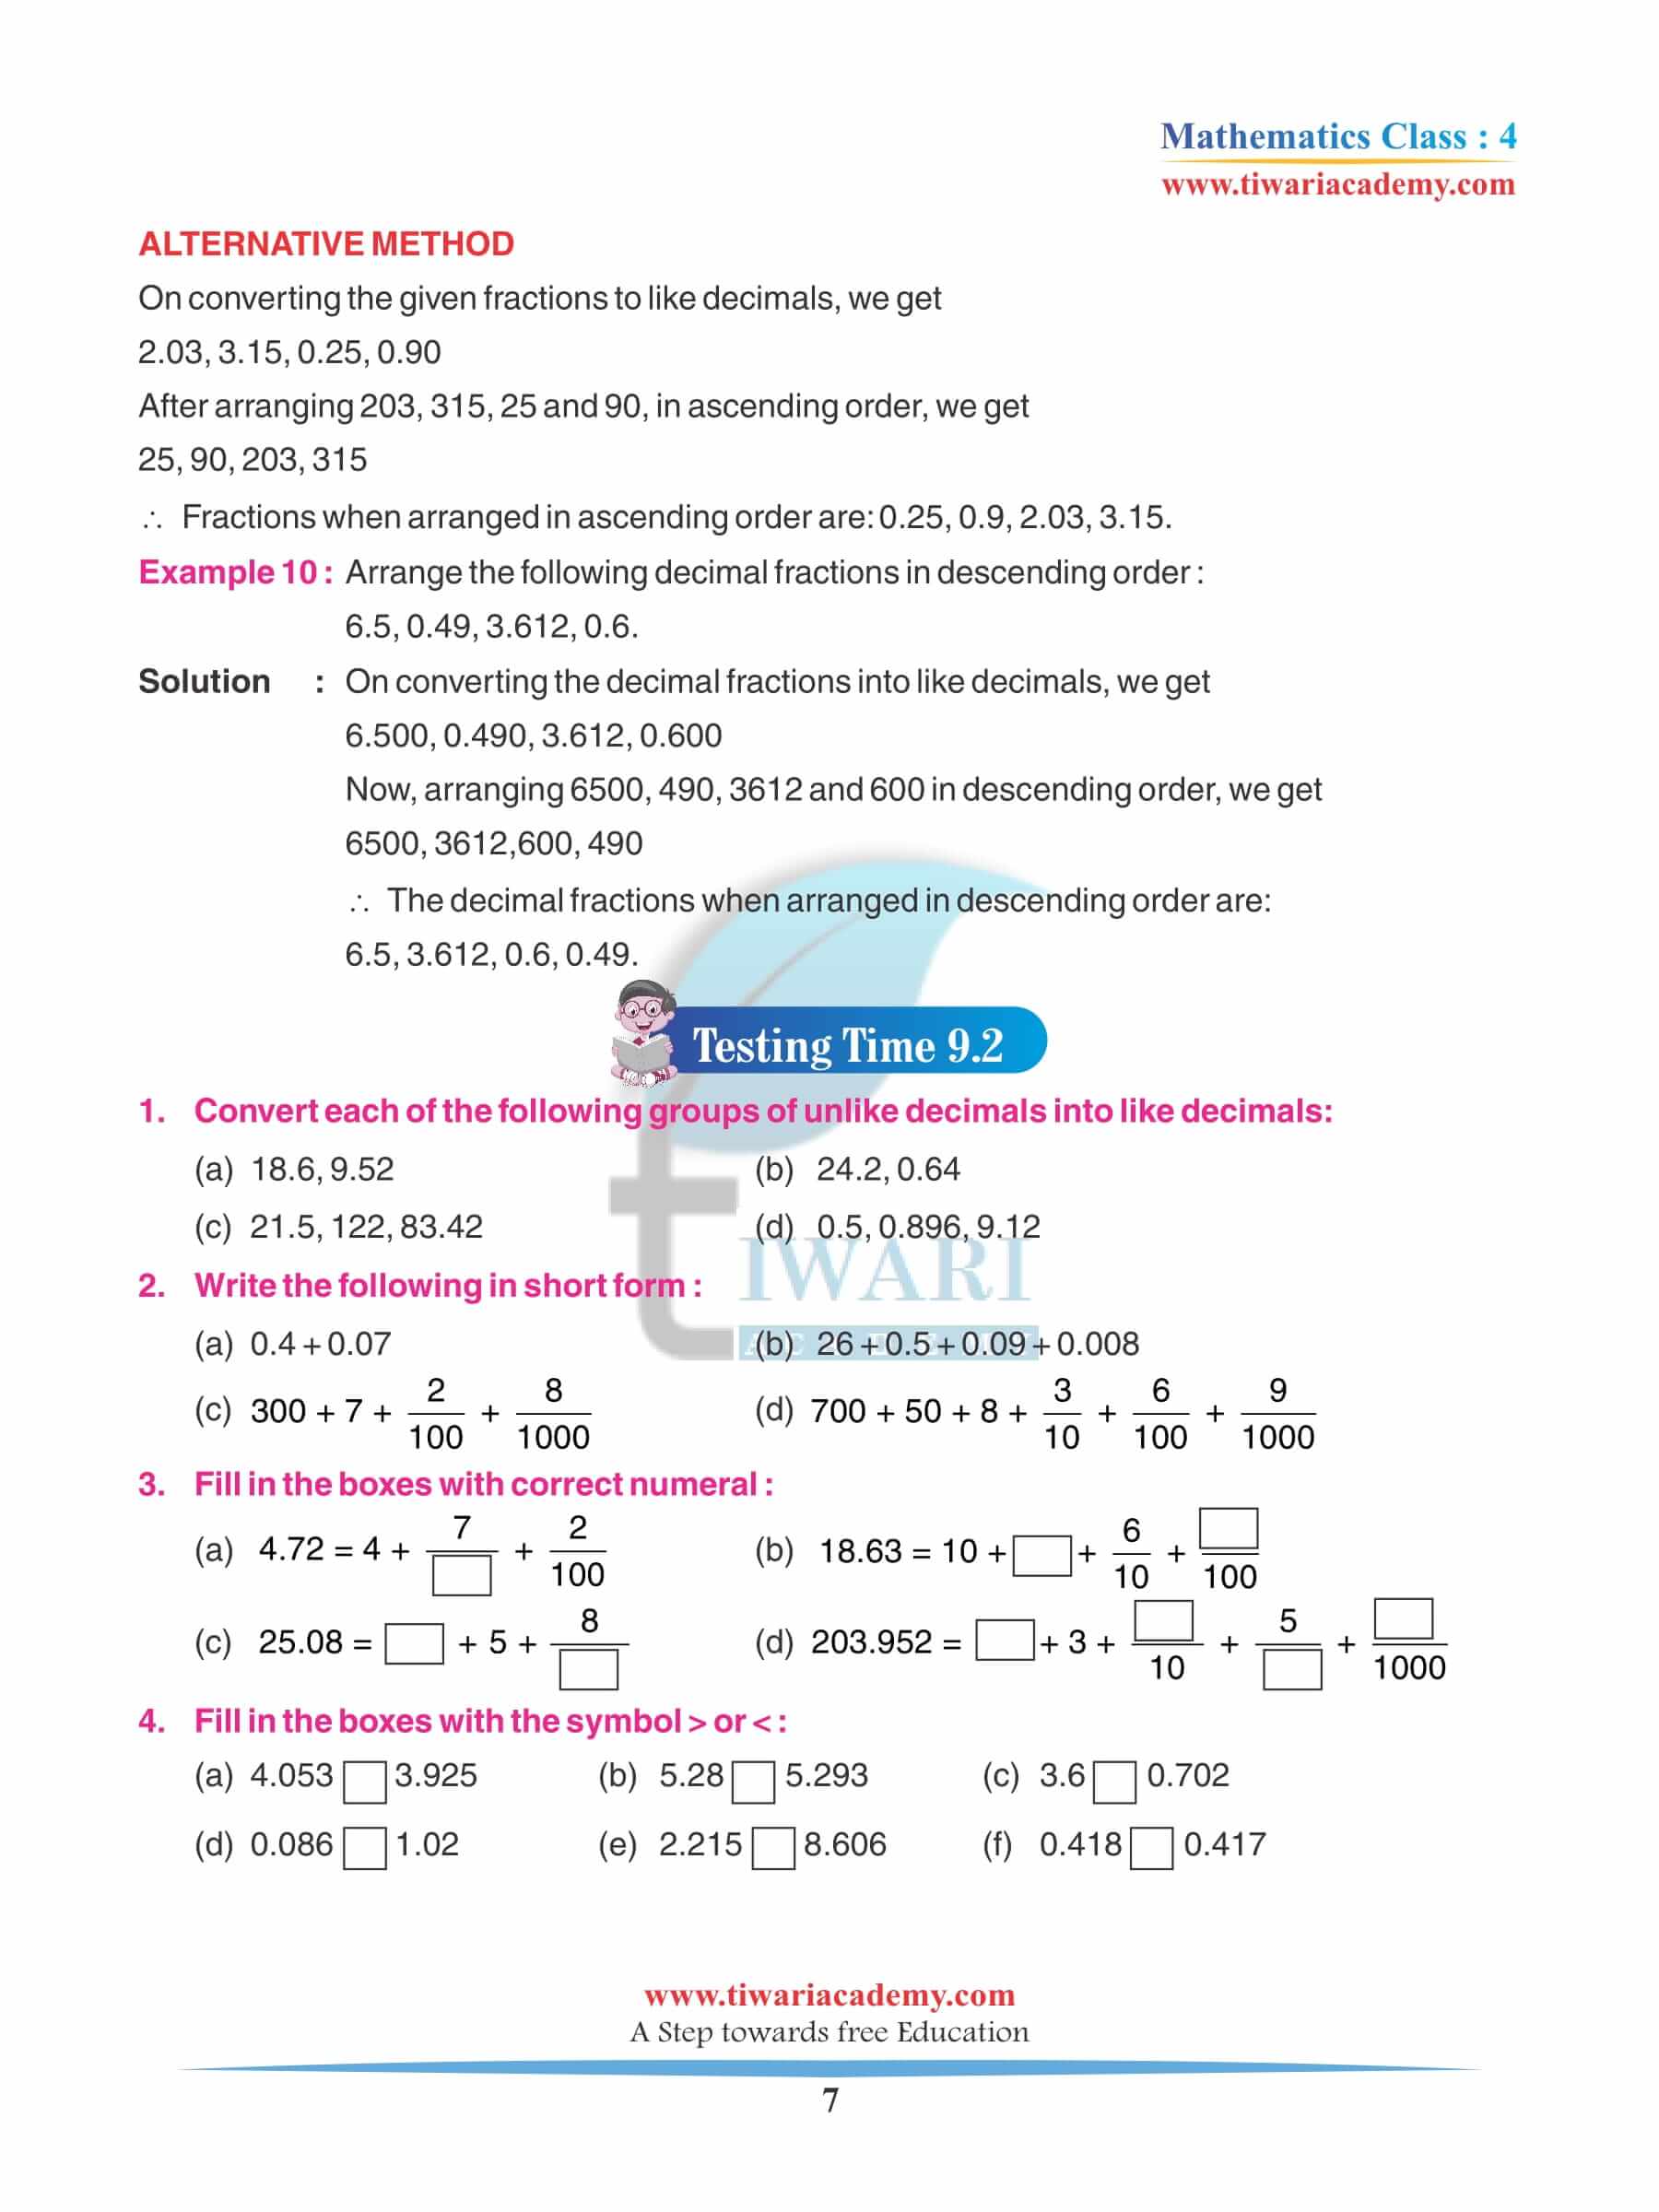 Class 4 Maths Chapter 9 Revision Book Exercises